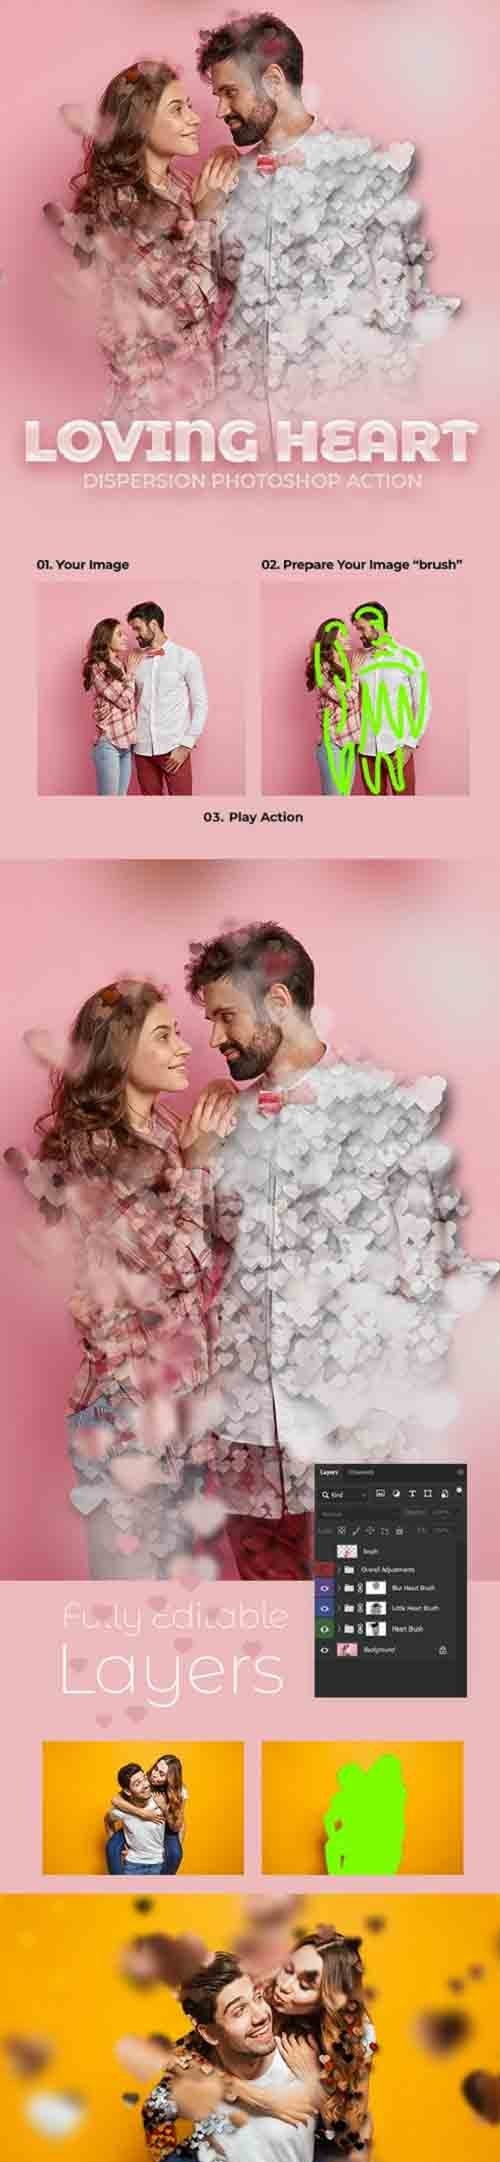 GraphicRiver - Loving Heart Dispersion Photoshop Action 30404701